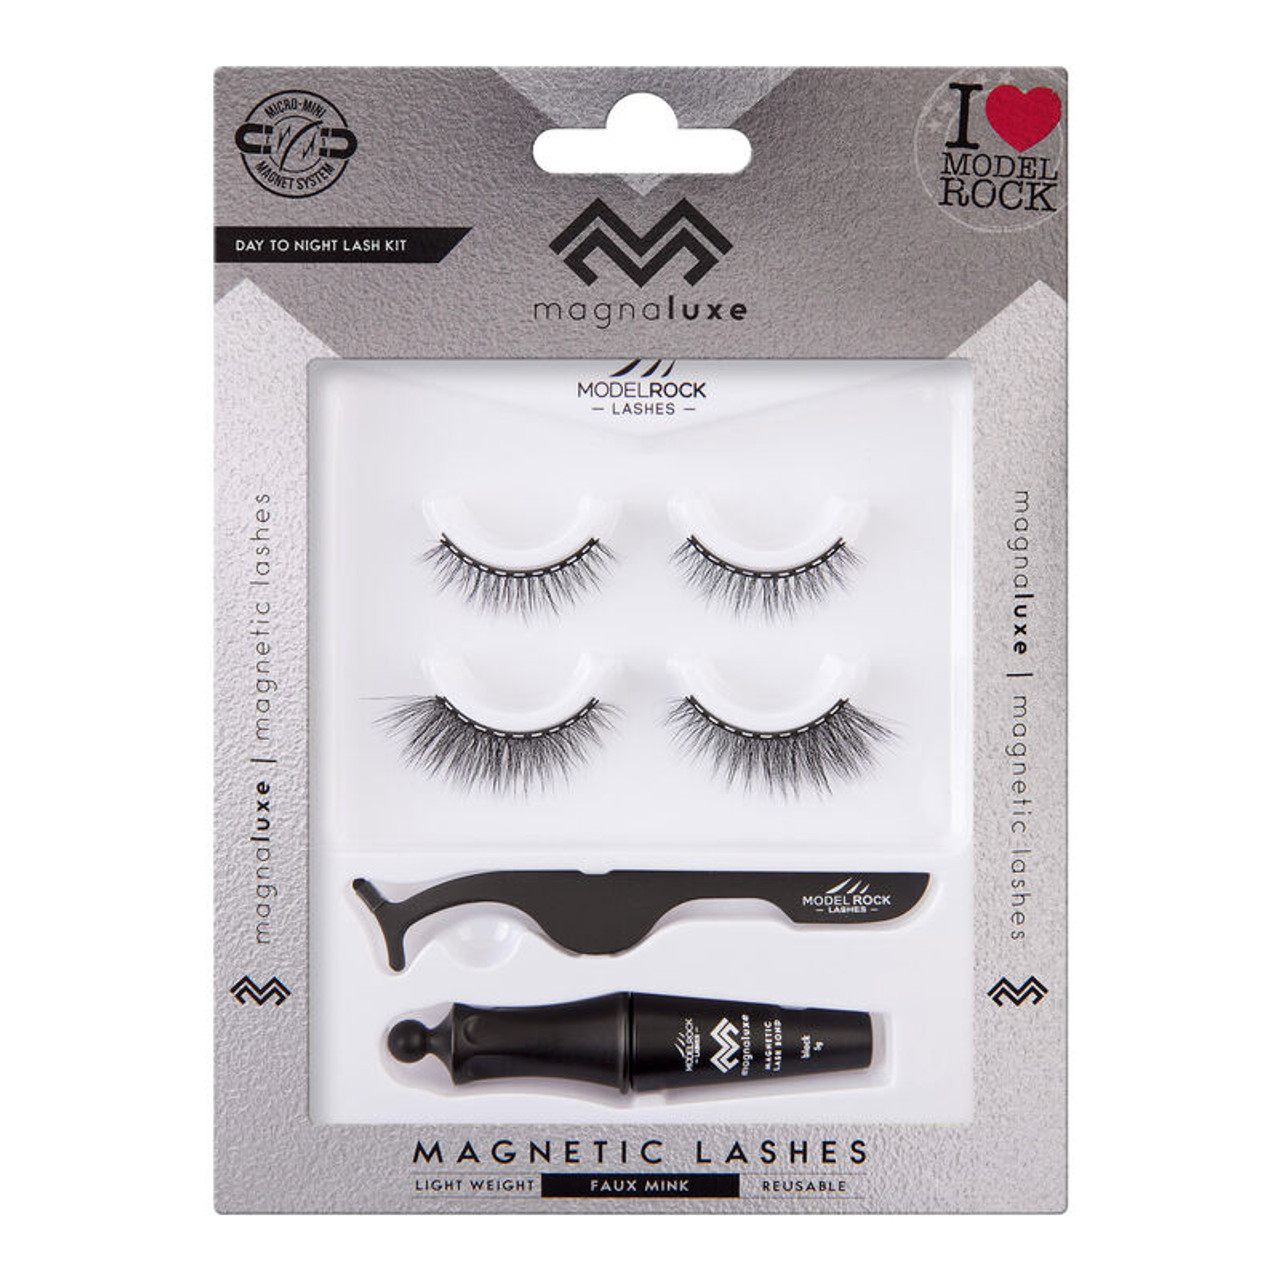 ModelRock MAGNA LUXE Magnetic Lashes + Accessories Kit - DAY to NIGHT